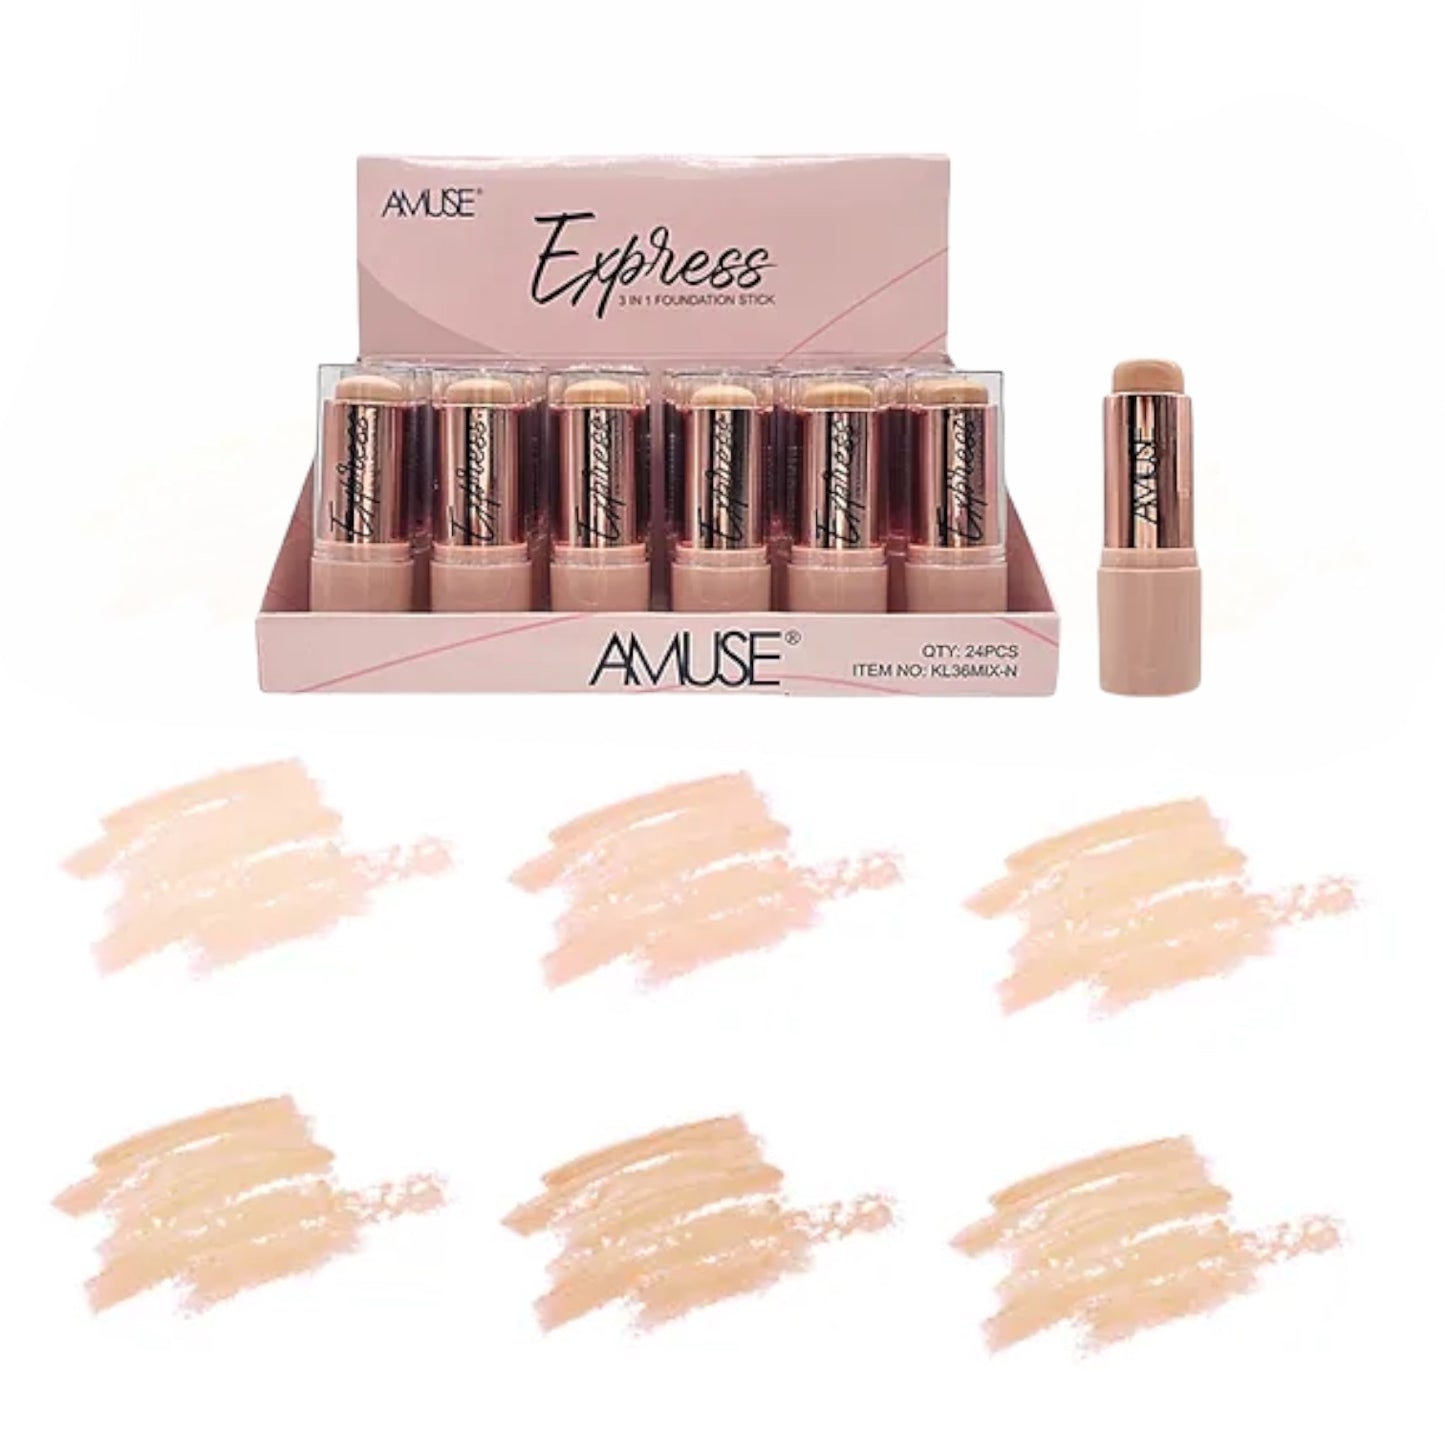 AMUSE EXPRESS 3 IN 1  FOUNDATION STICK KL36MIX-N R42